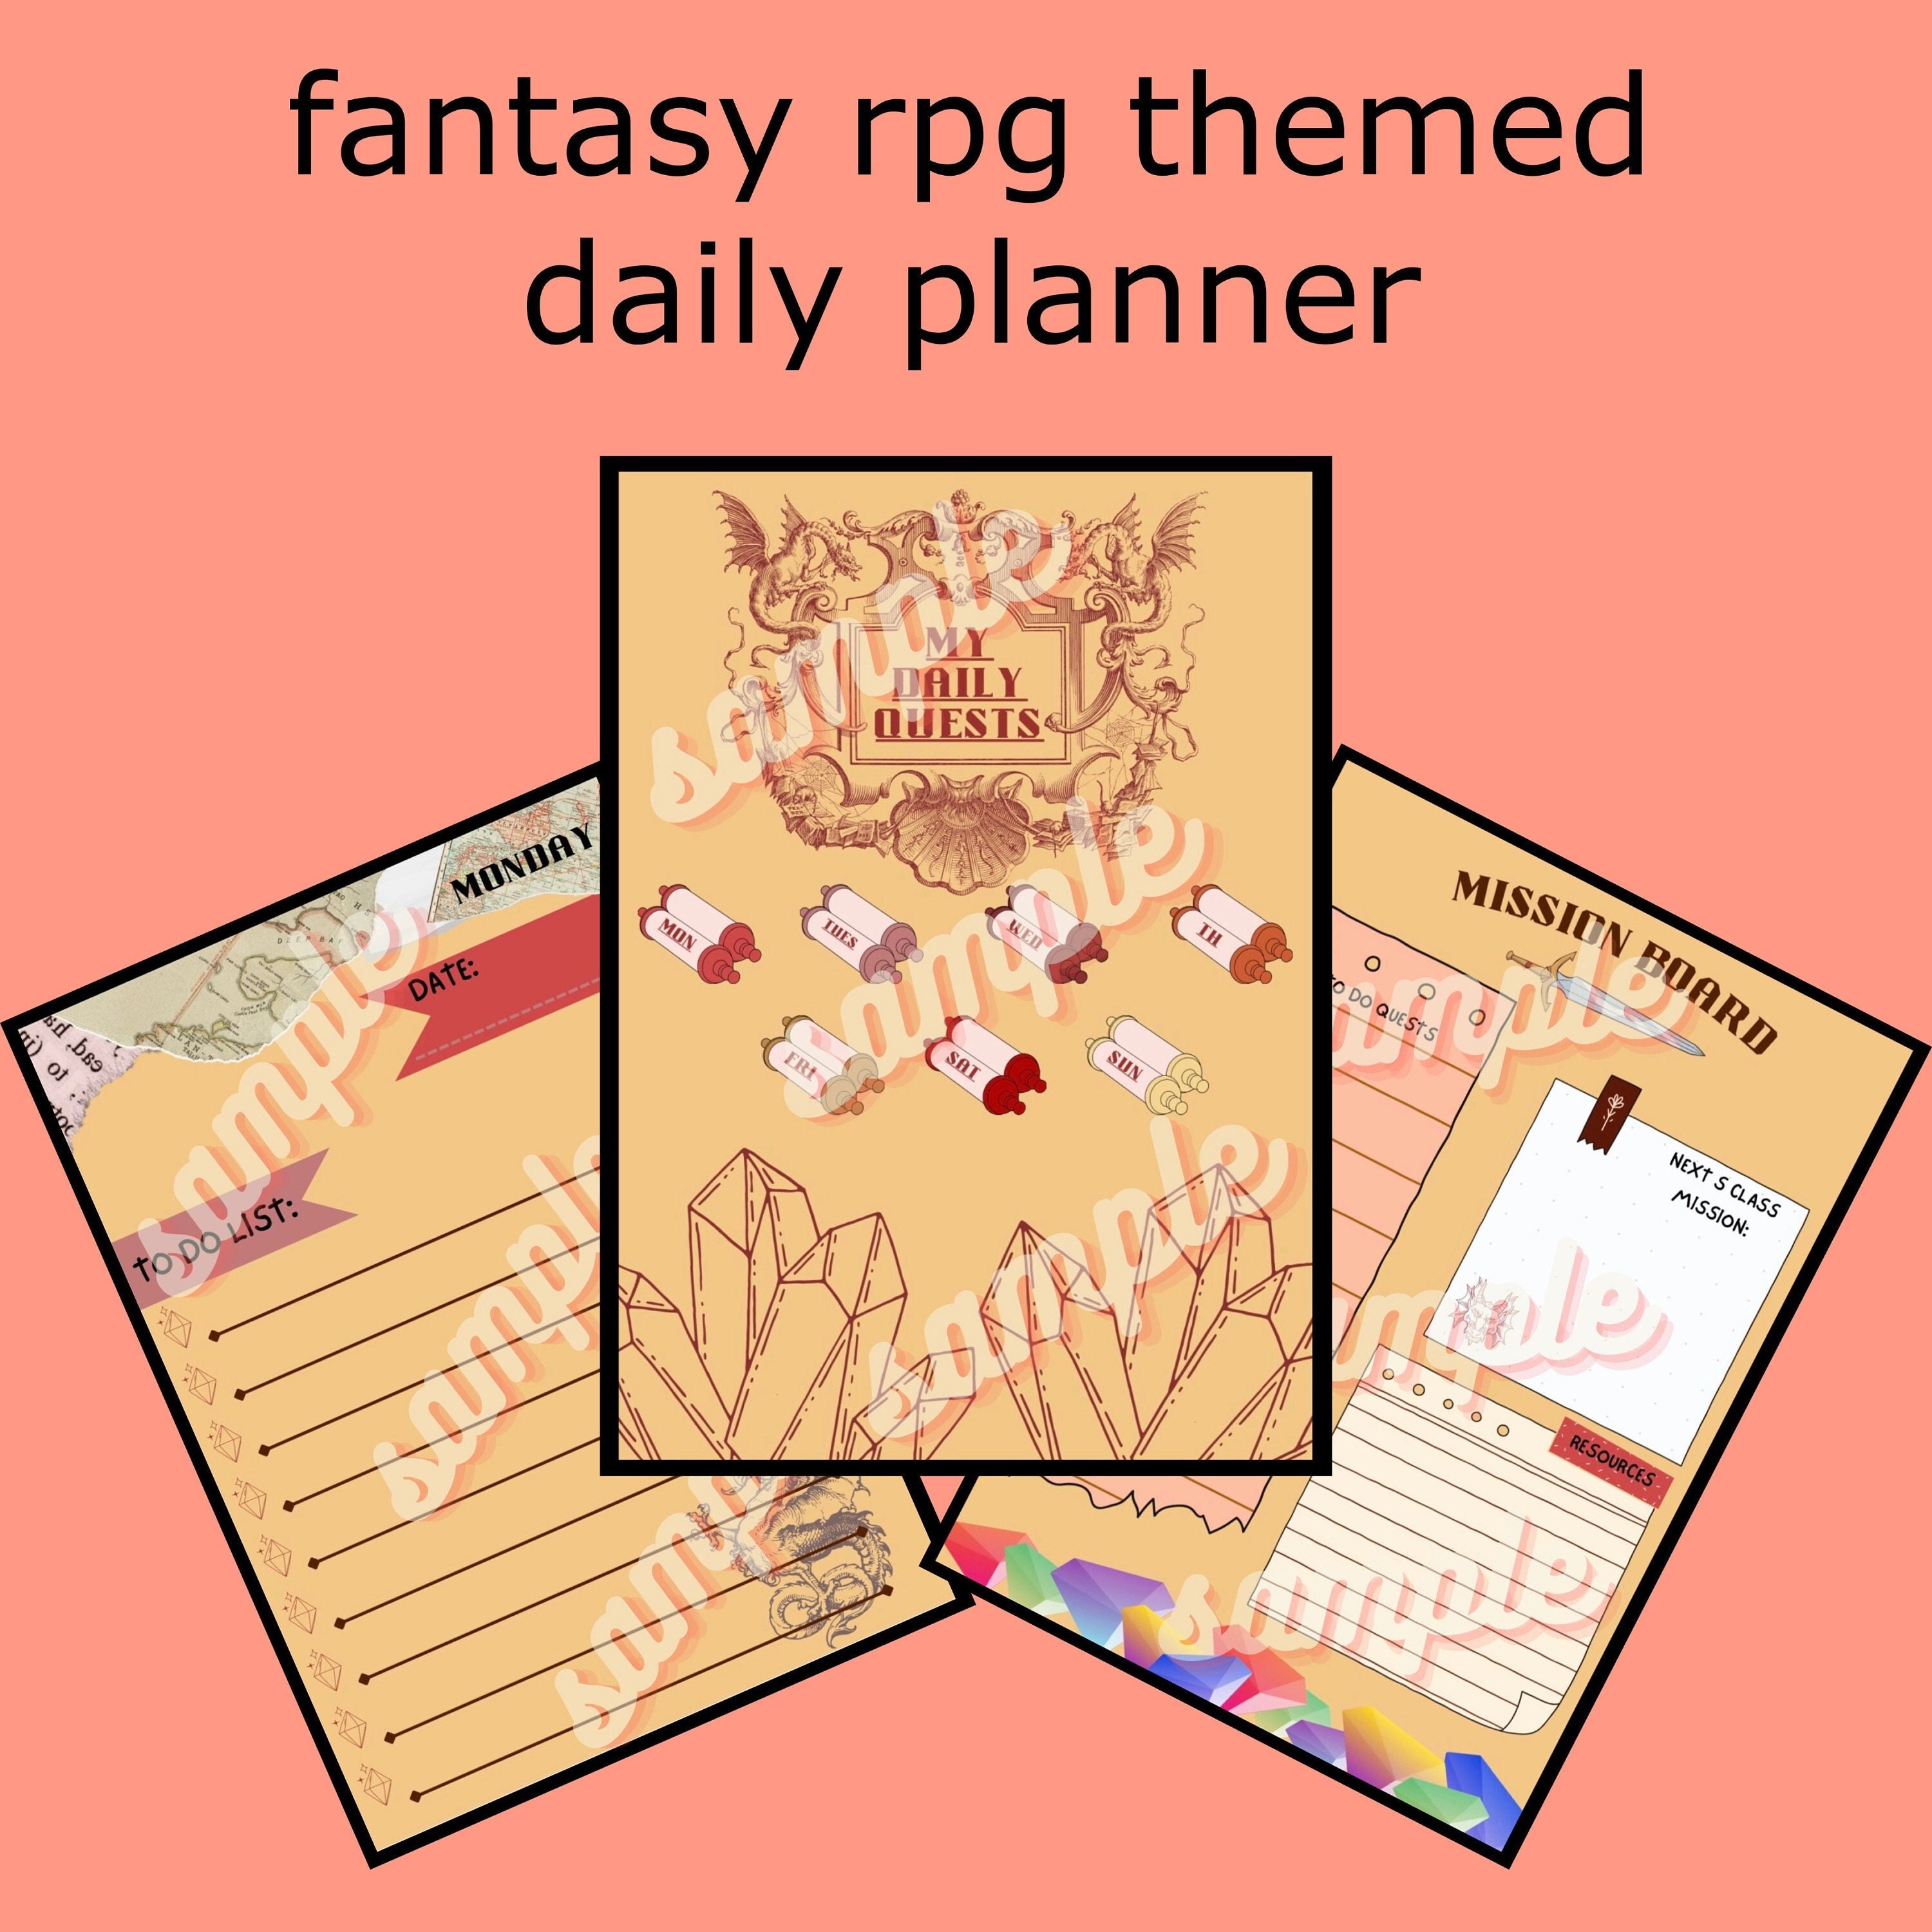 Dungeons and Dragons Weekly Planner Bullet Journal With D&D Theme A5 2021  Planner Inserts -  Denmark